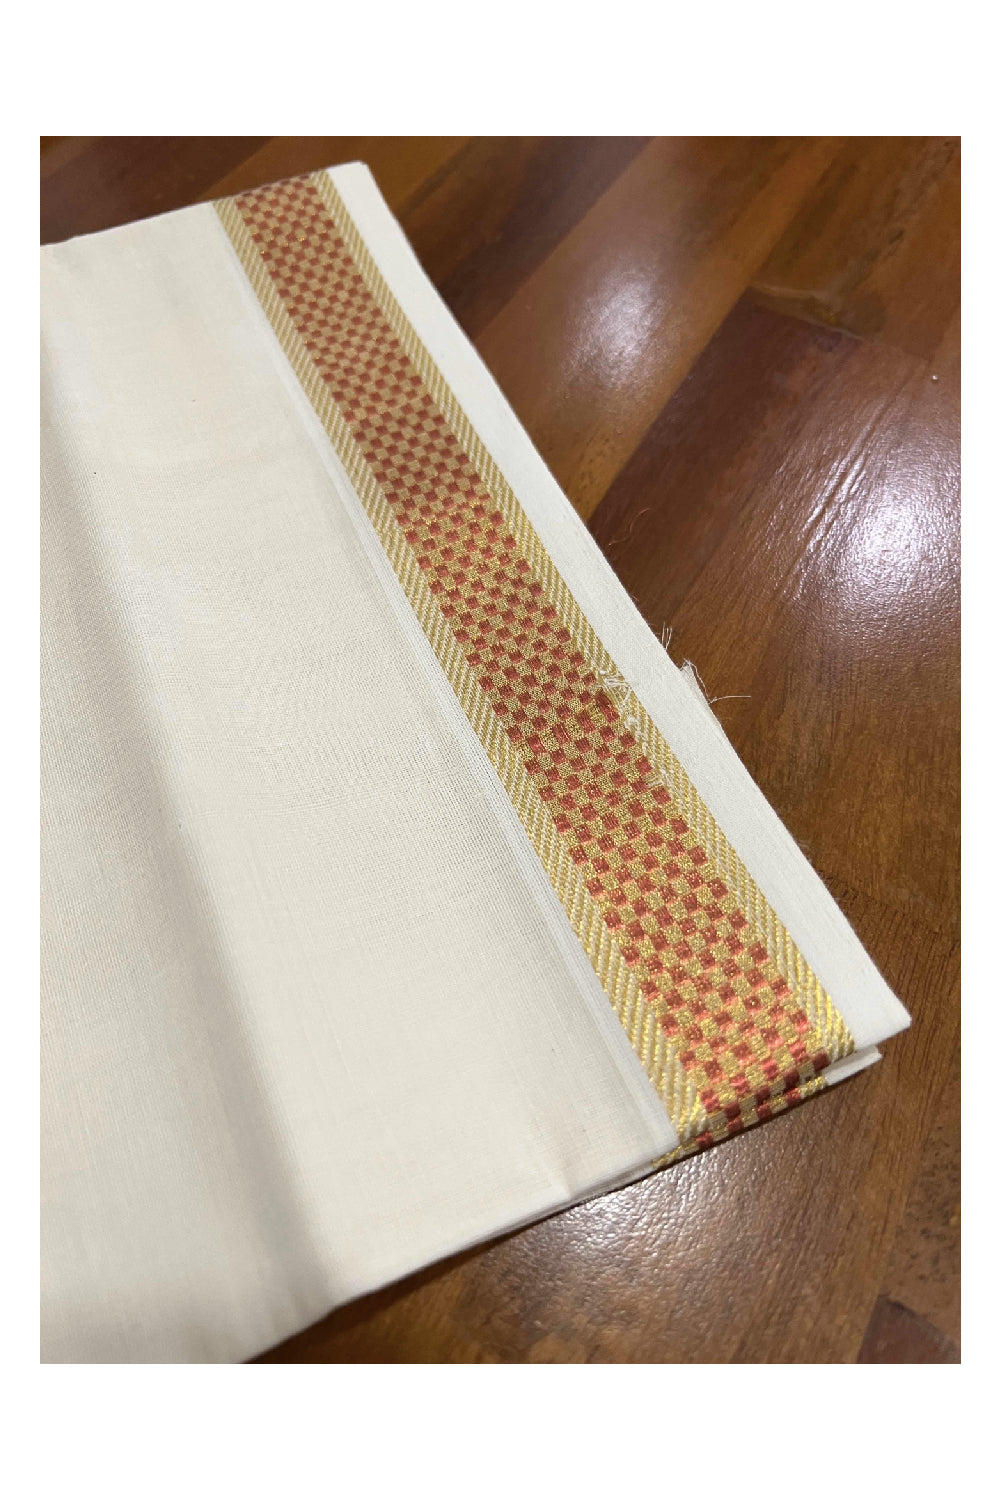 Southloom Kuthampully Handloom Pure Cotton Mundu with Golden and Copper Red Kasavu Border (South Indian Dhoti)